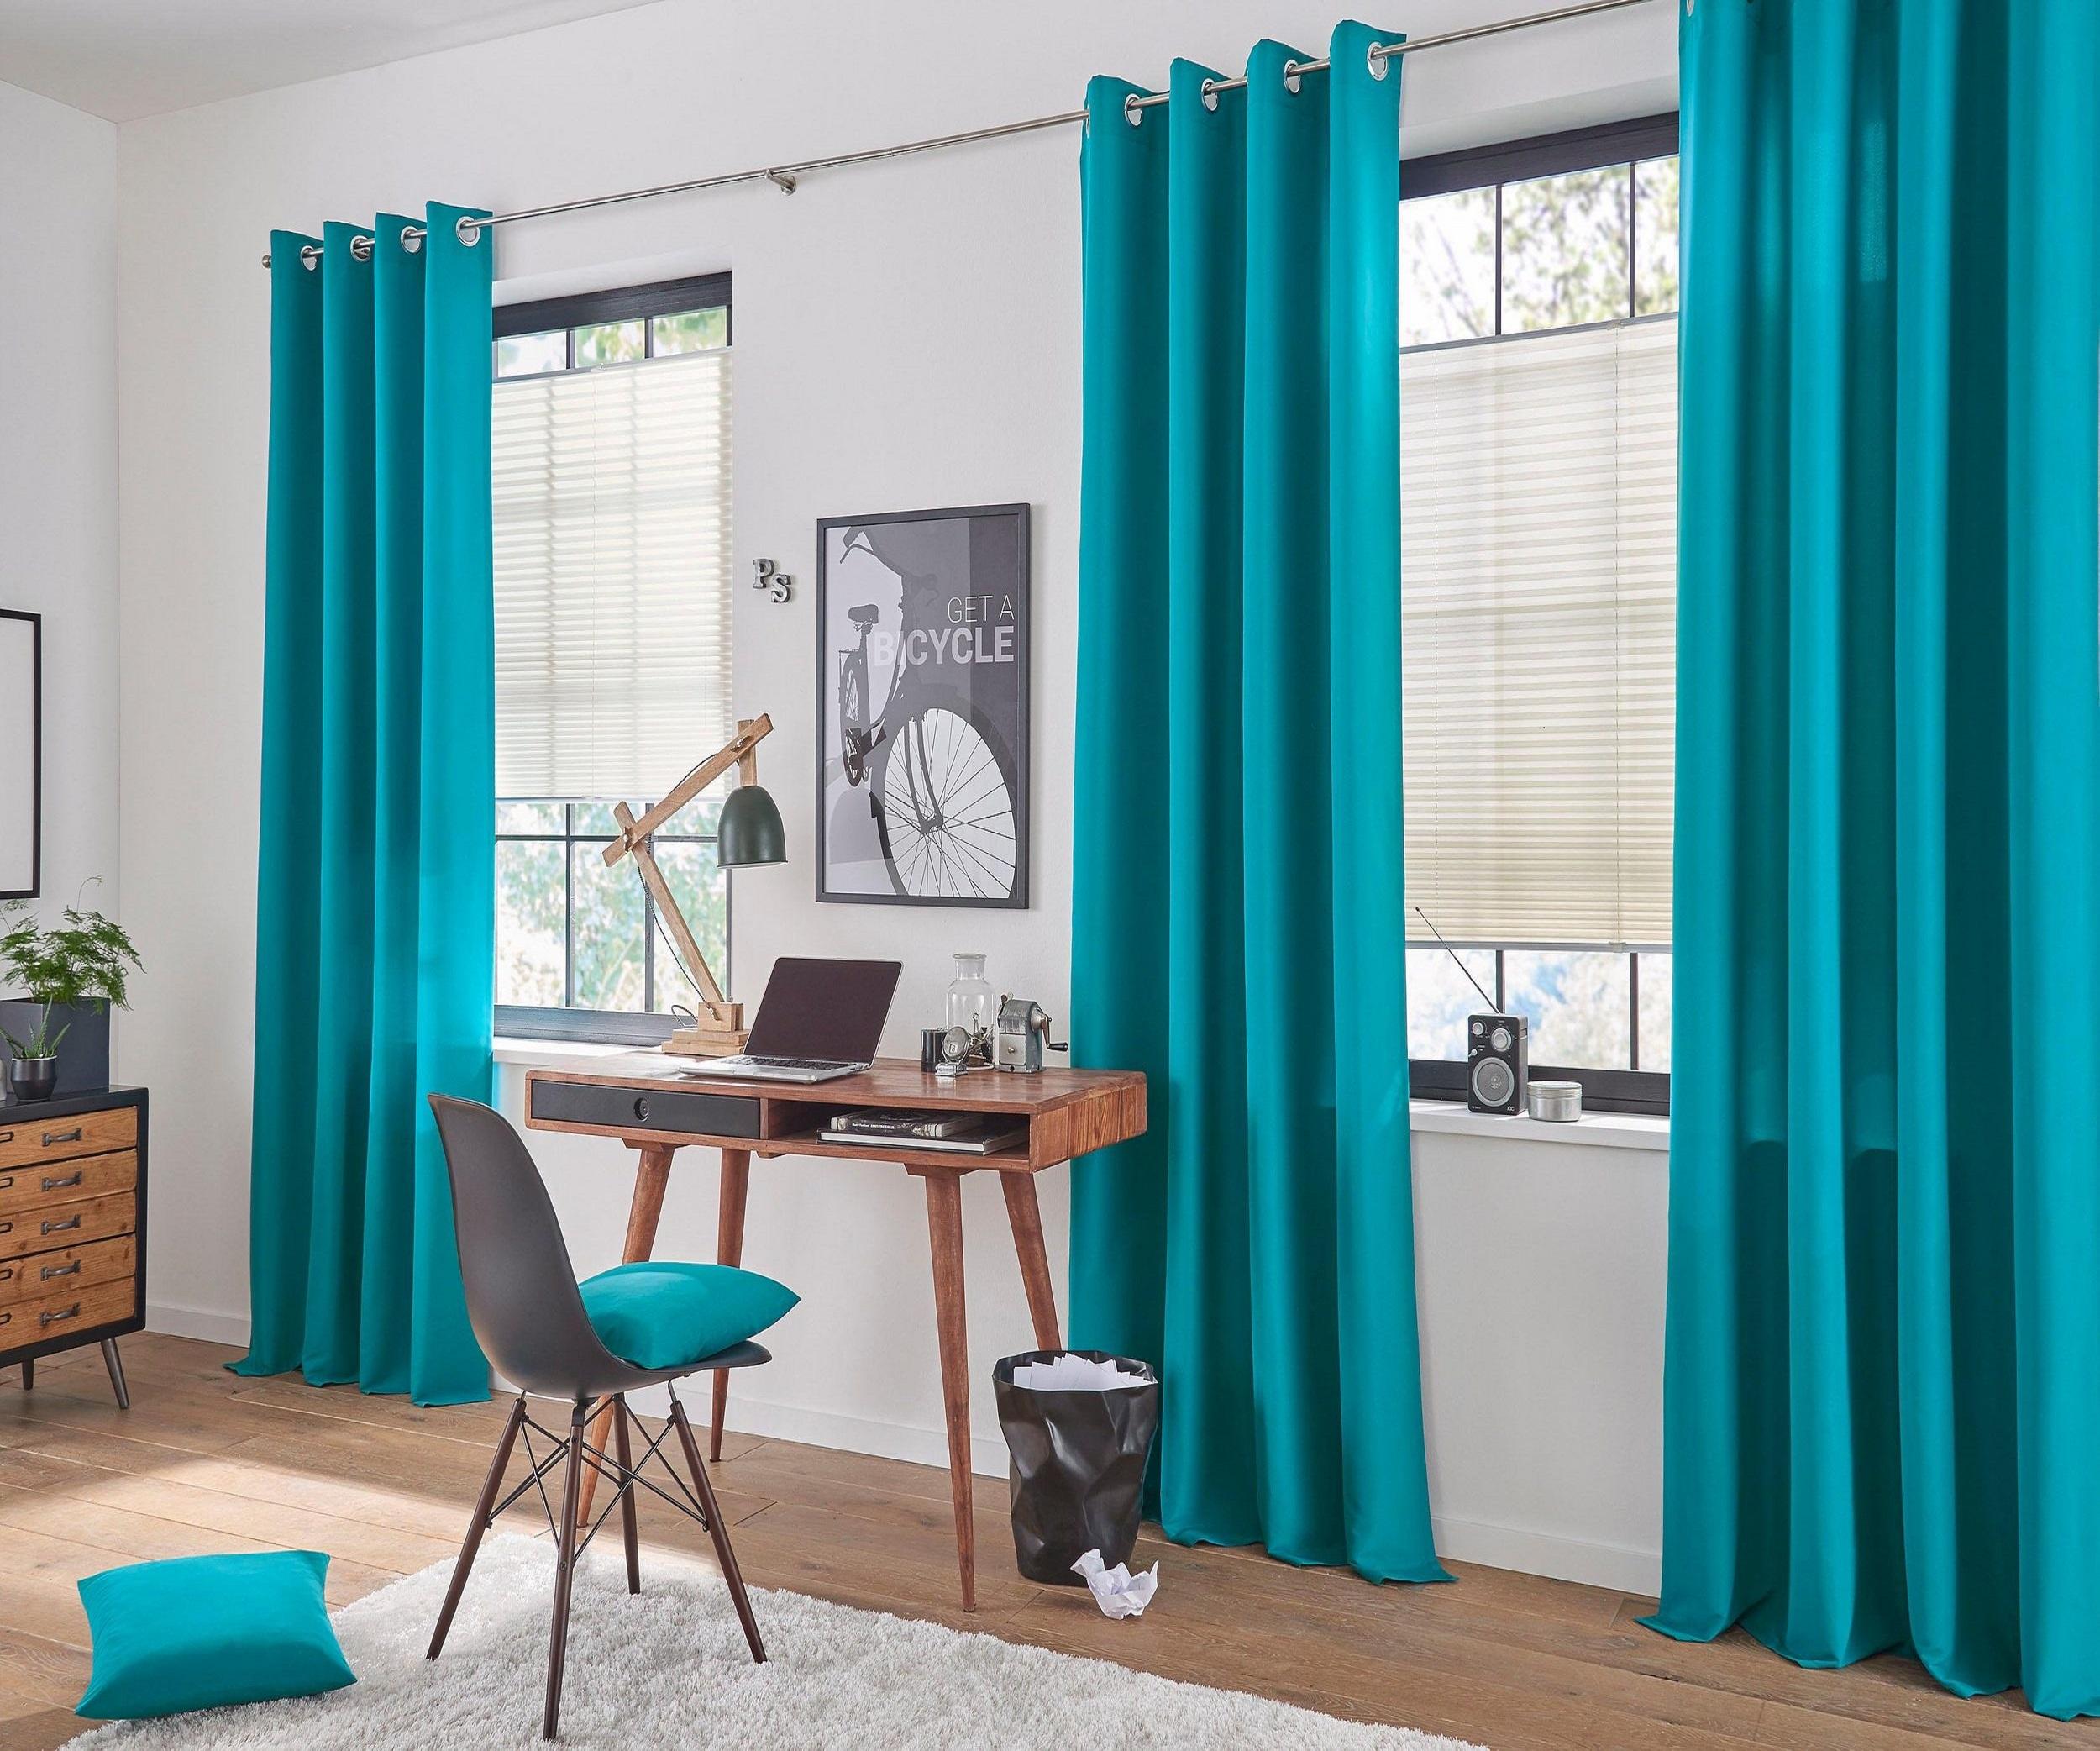 Why Should You Consider Blackout Curtains for a Restful Night's Sleep?